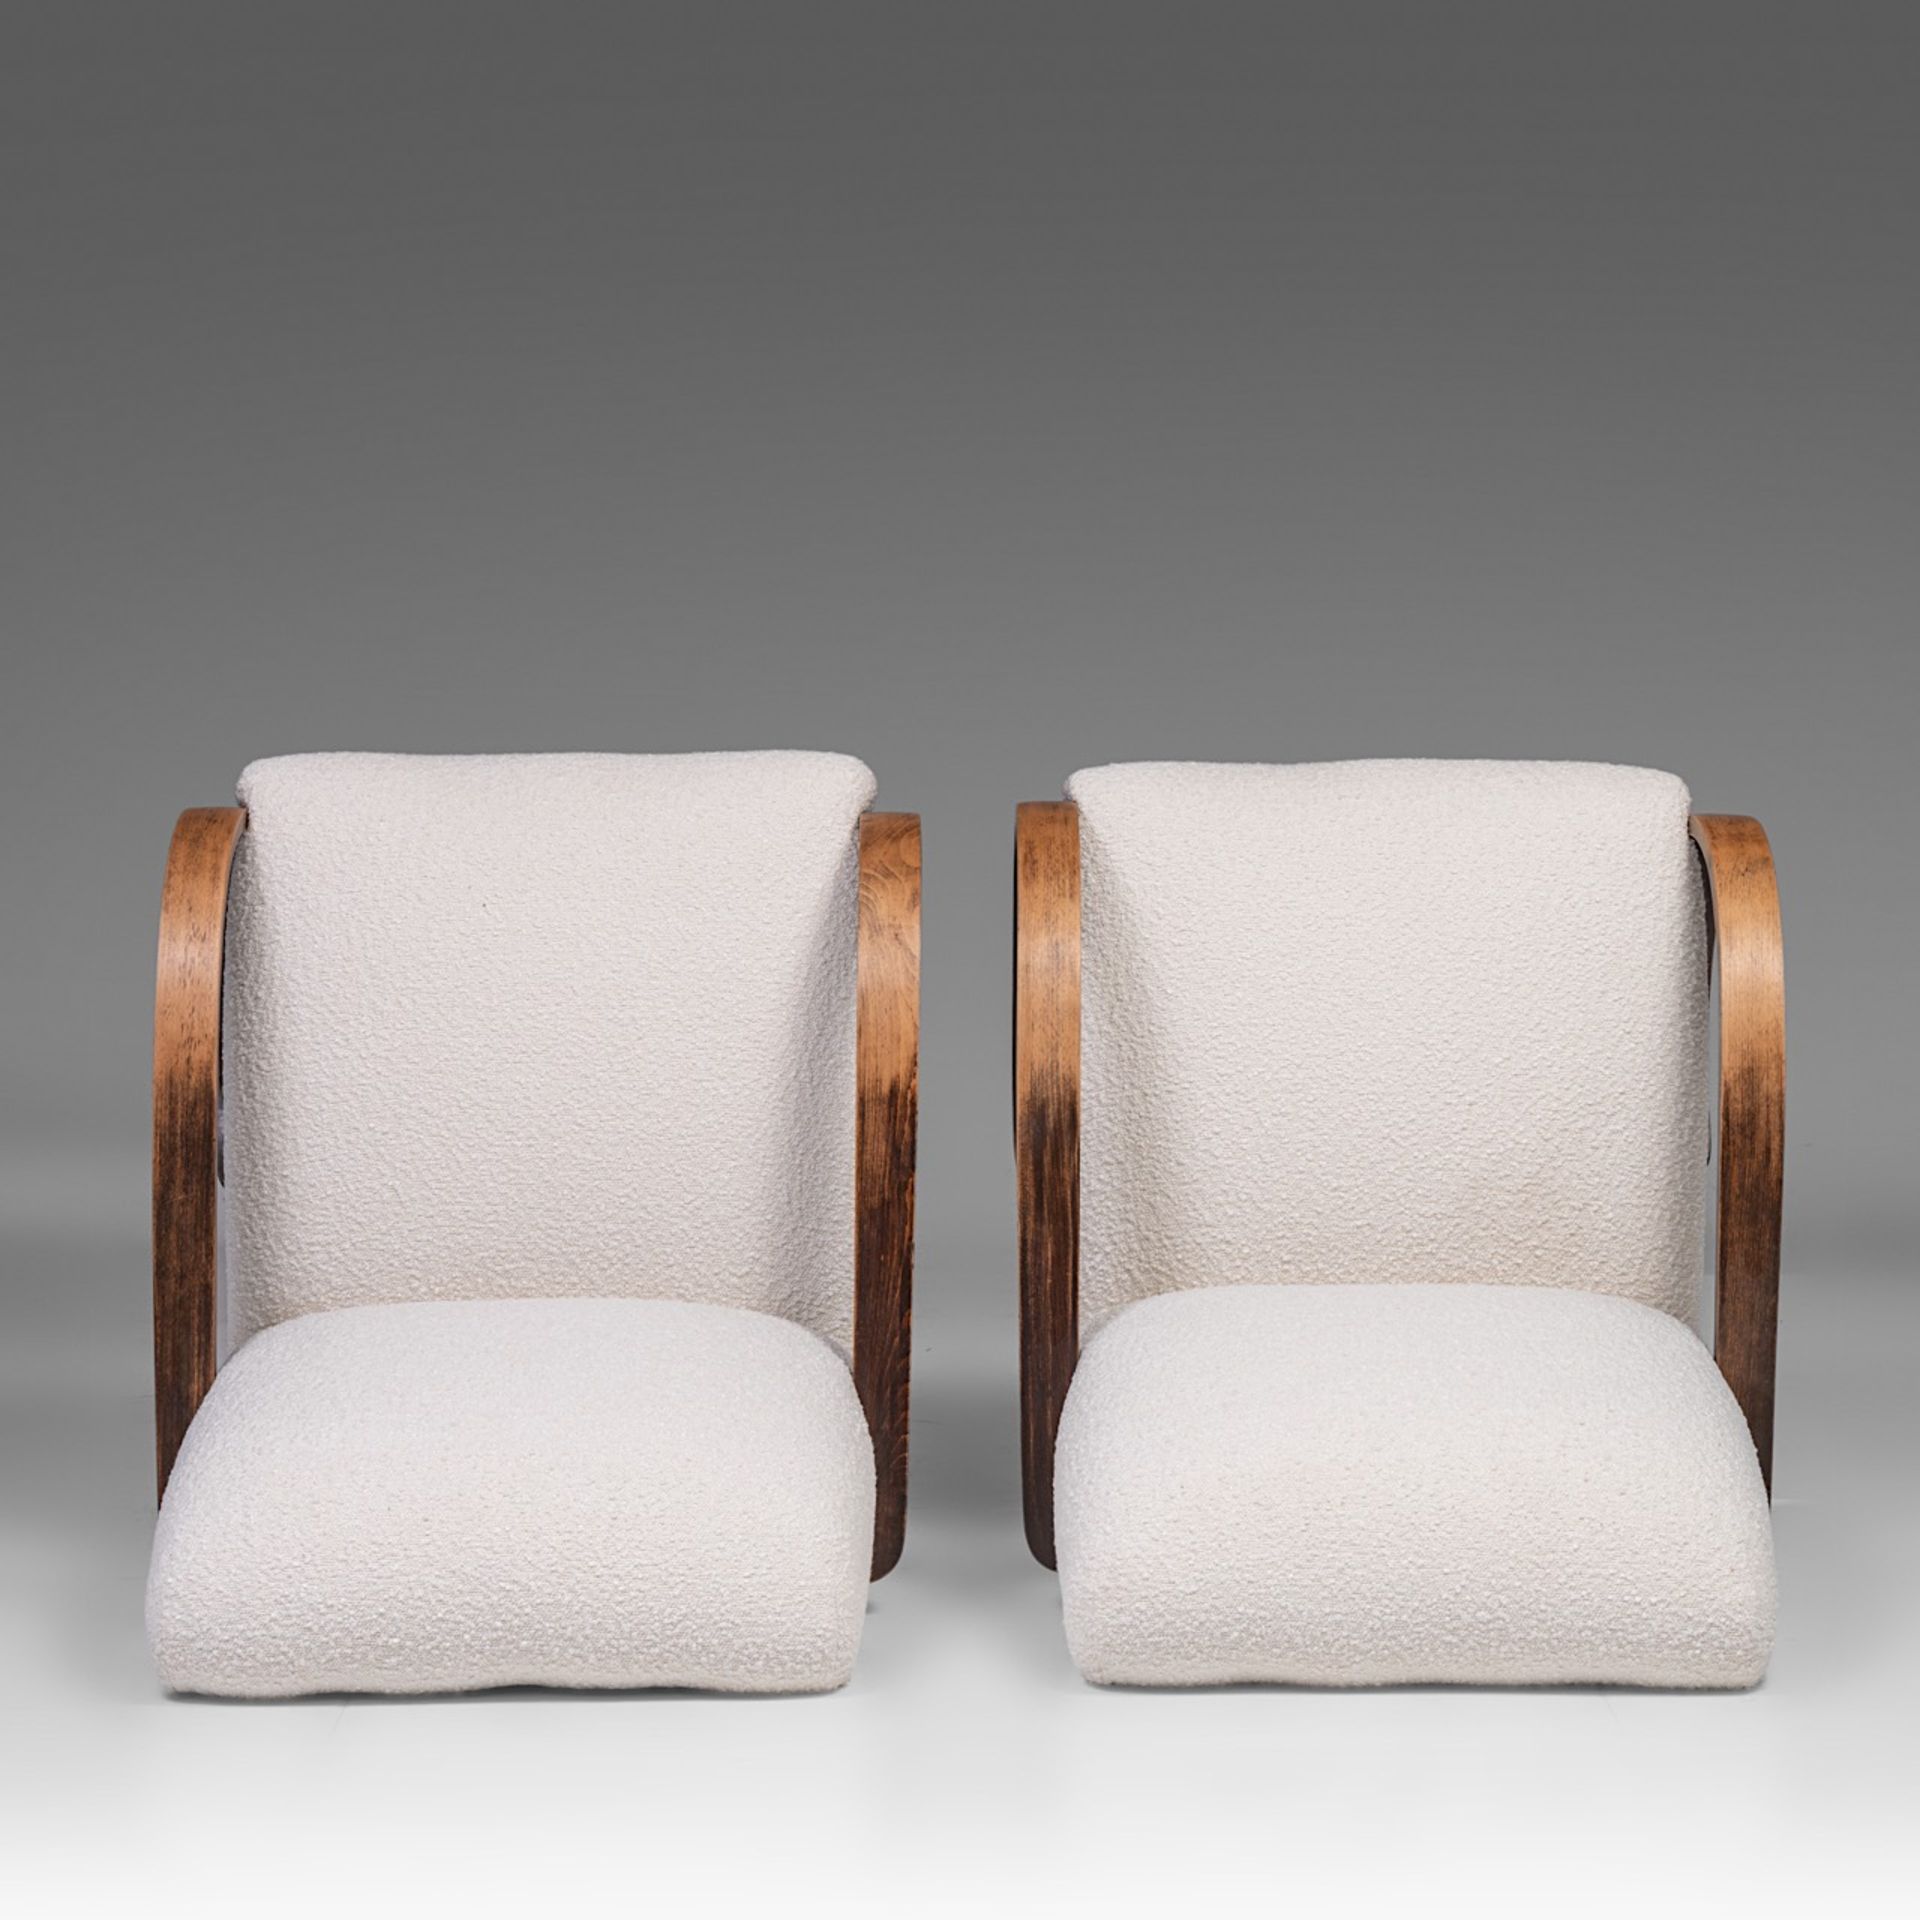 A pair of Mid-century Armchairs by Jindrich Halabala, 1950s 83 x 68 x 87 cm. (32.6 x 26.7 x 34 1/4 i - Image 7 of 13